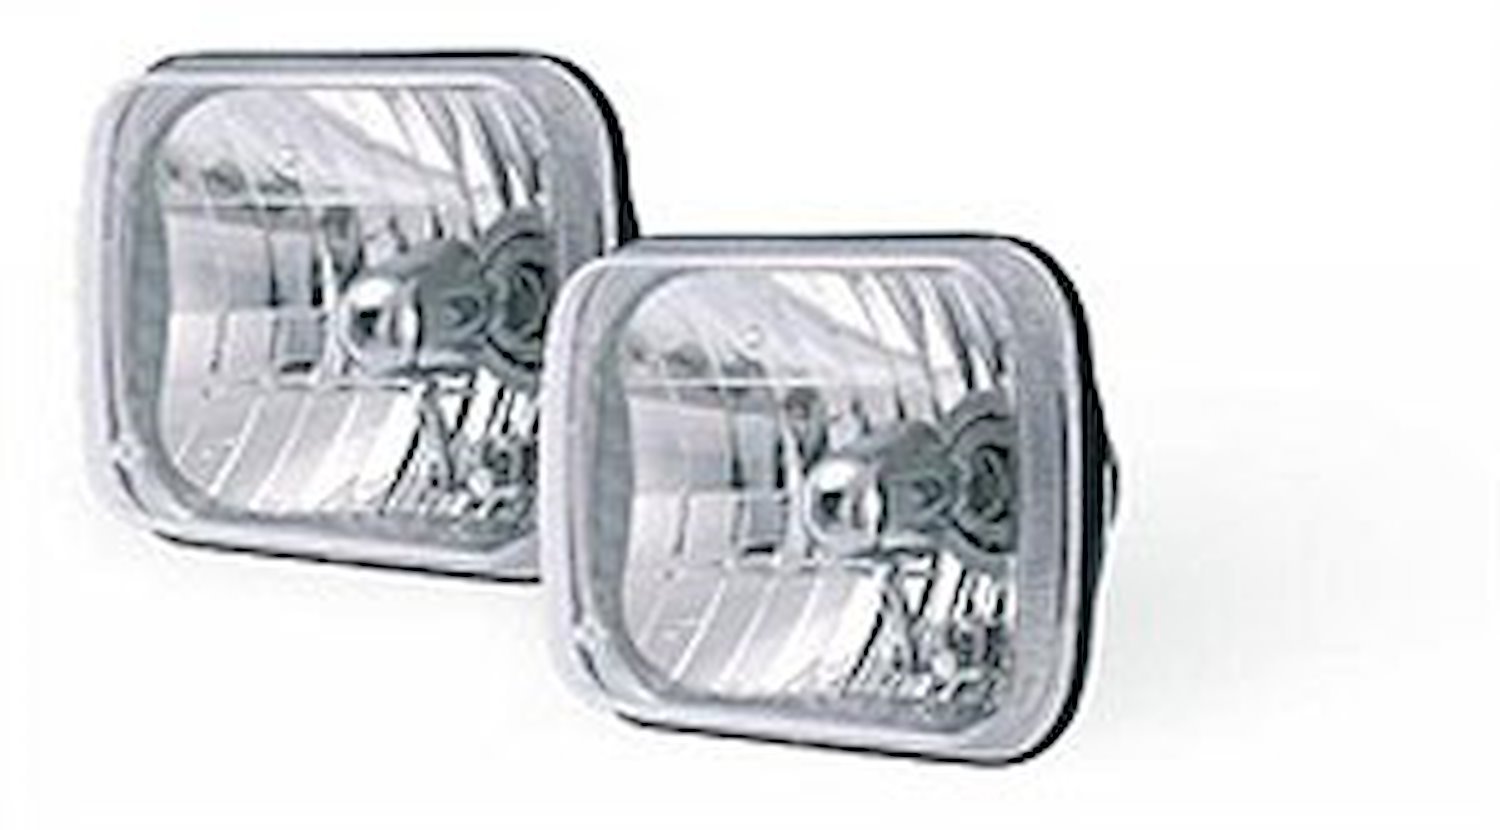 H4 MSR Headlight Conversion Kit Direct Replacement for 1987-1995 Wrangler YJ